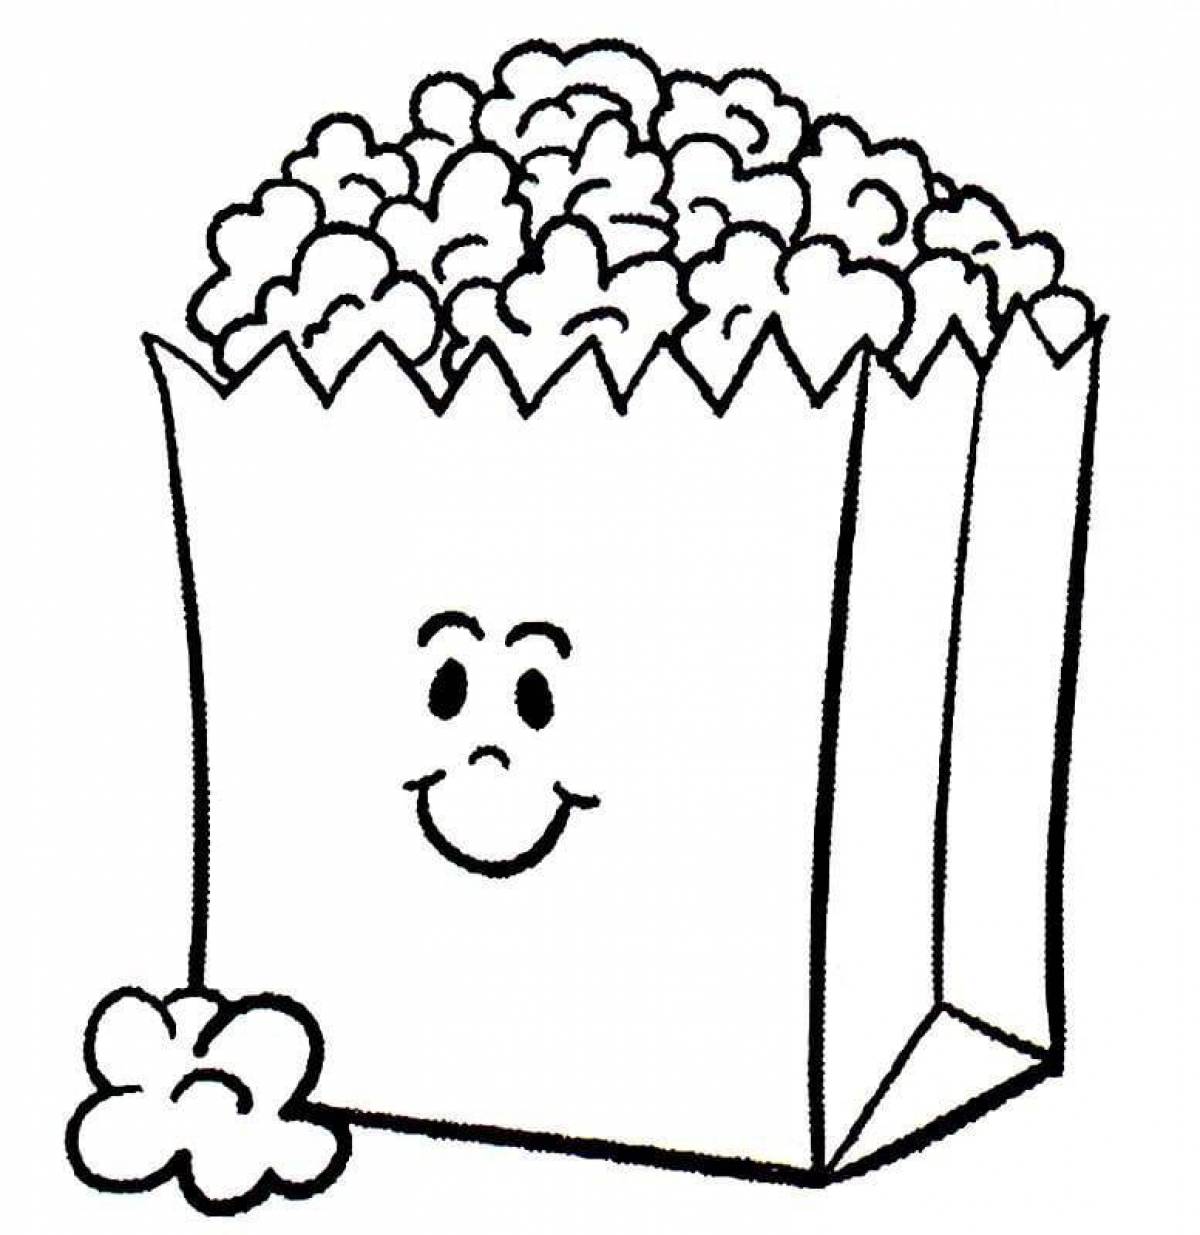 Spicy popcorn coloring page